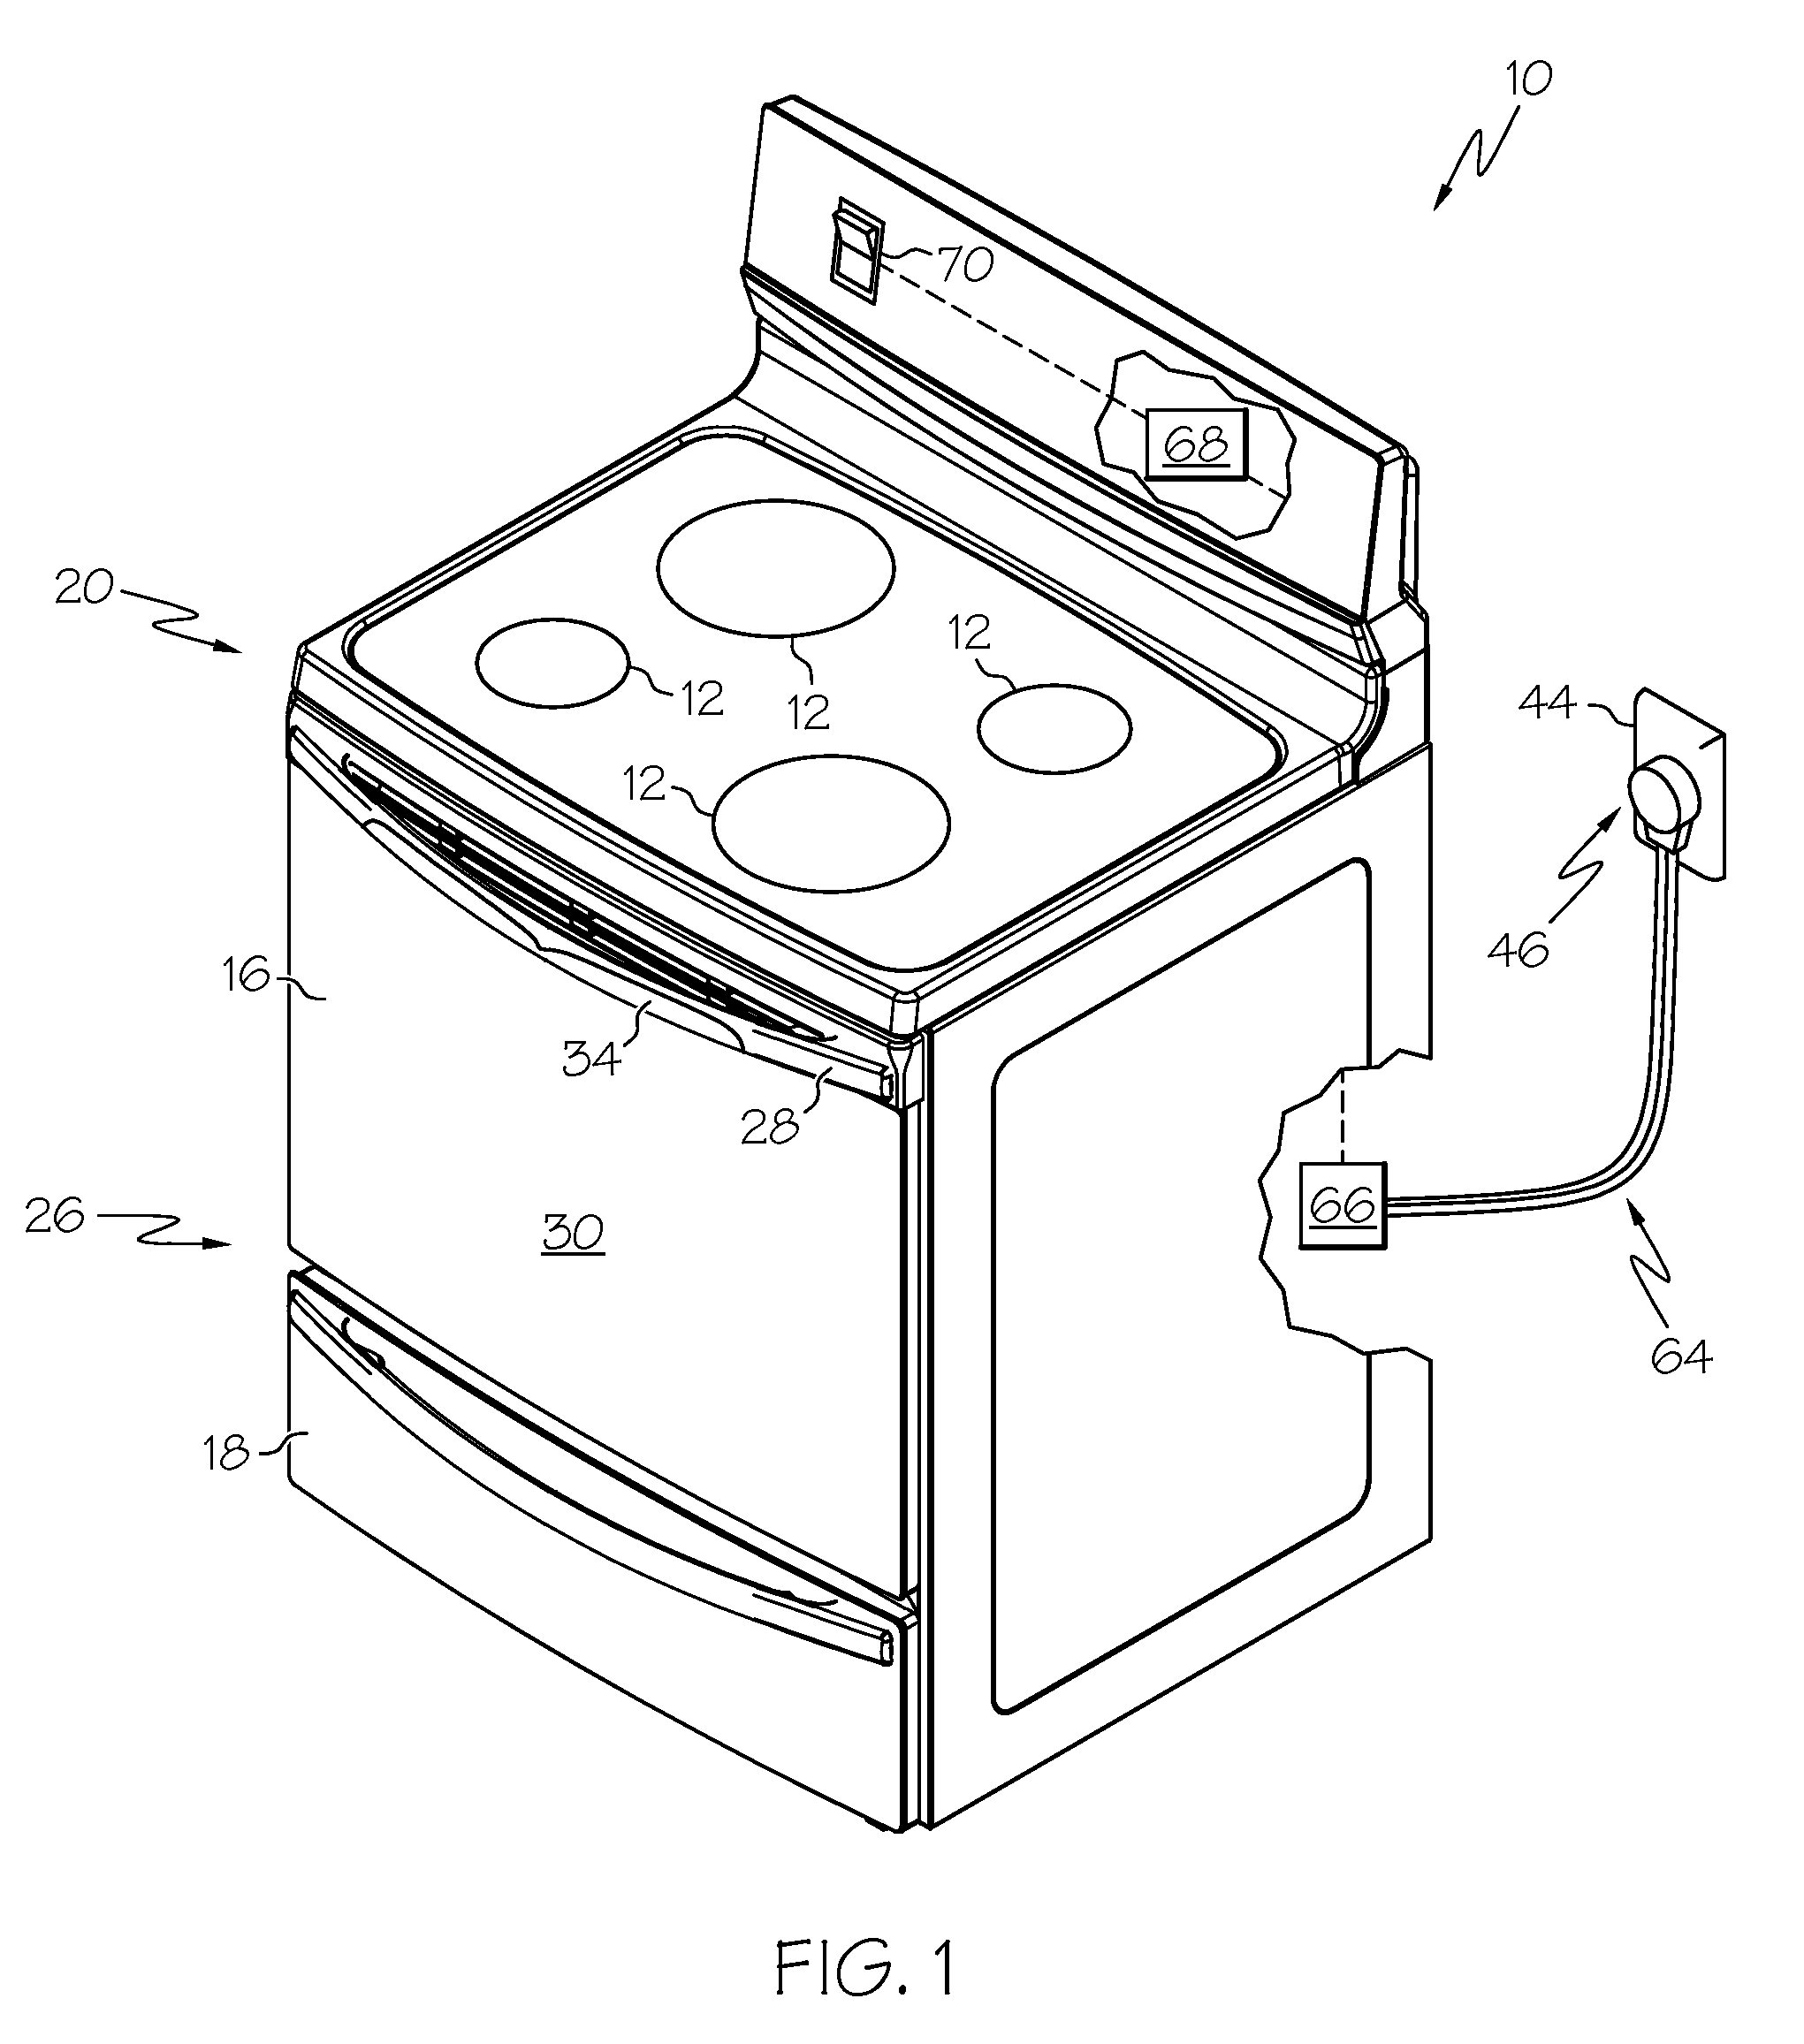 Electric current conduction system for appliance